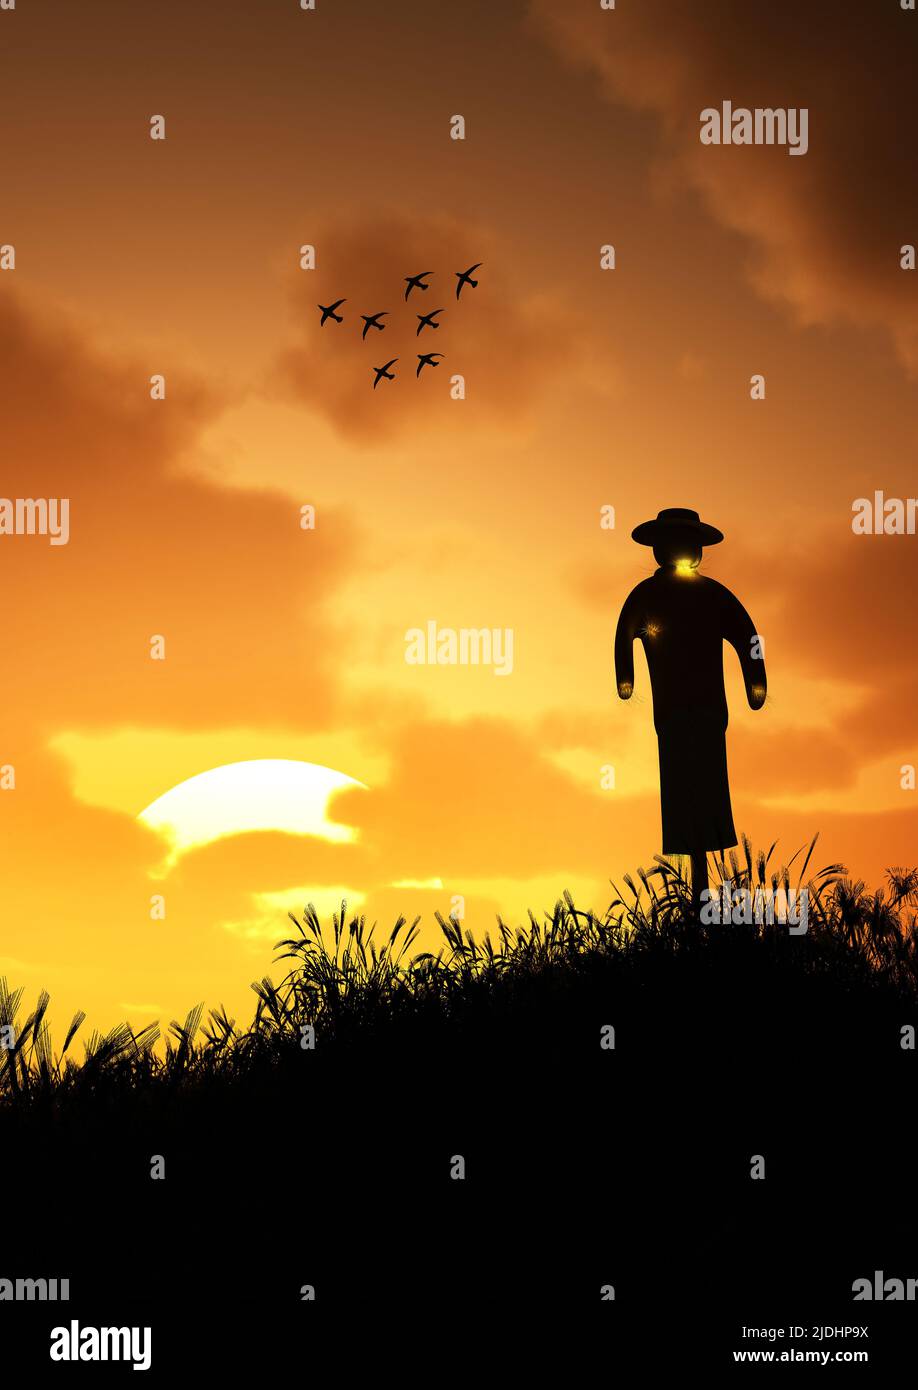 A Scarecrow Standing In A Field Stock Photo